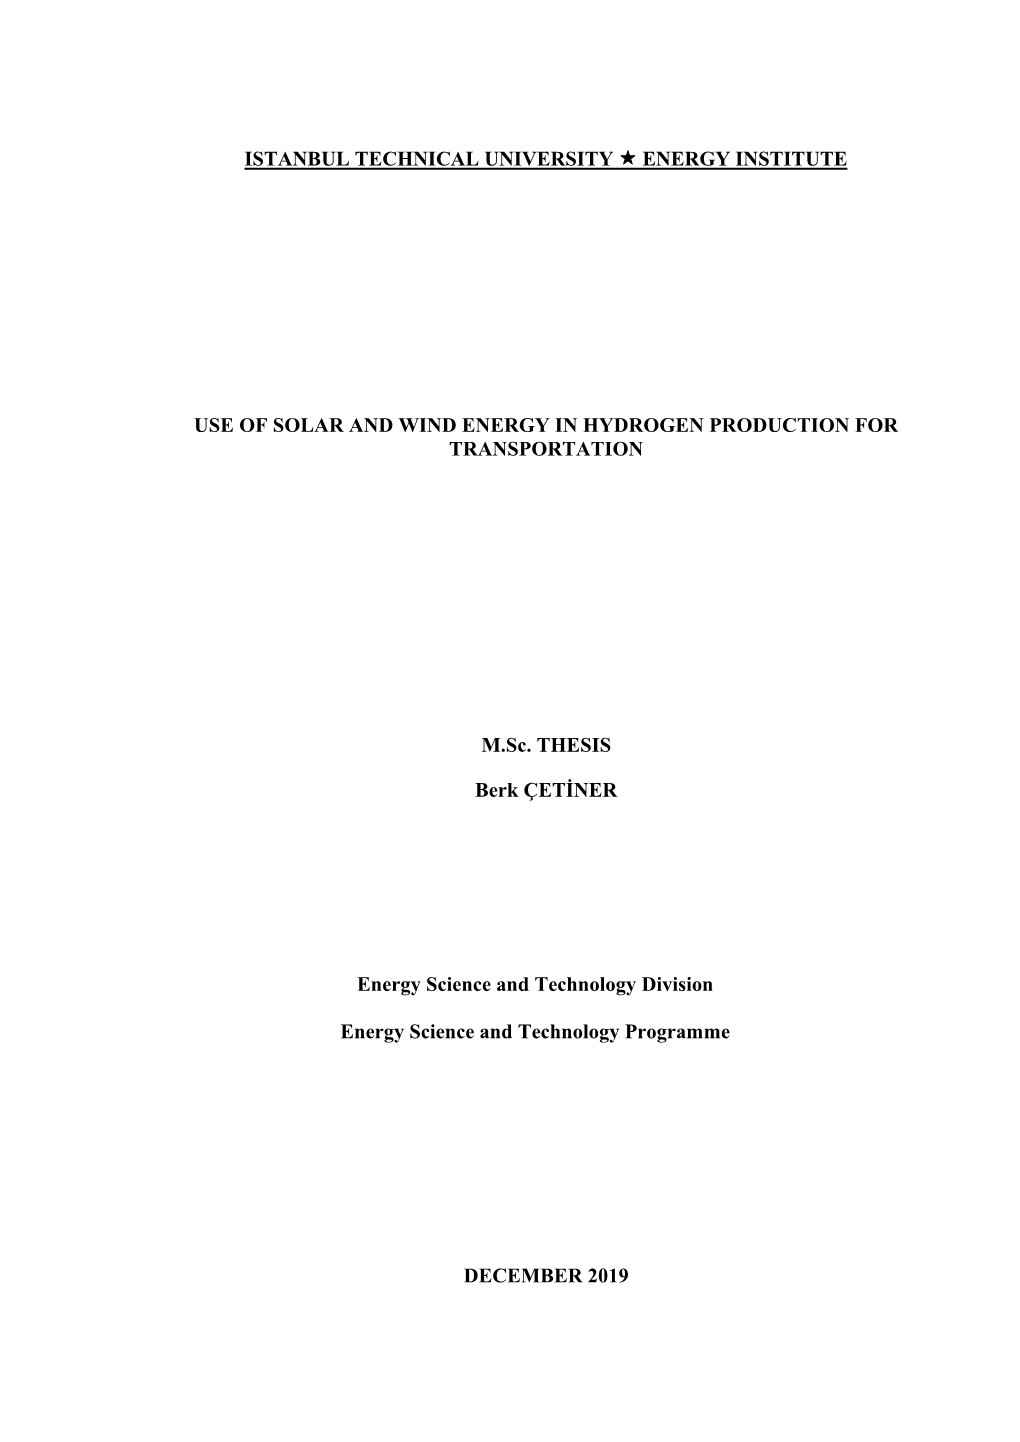 ISTANBUL TECHNICAL UNIVERSITY ENERGY INSTITUTE M.Sc. THESIS